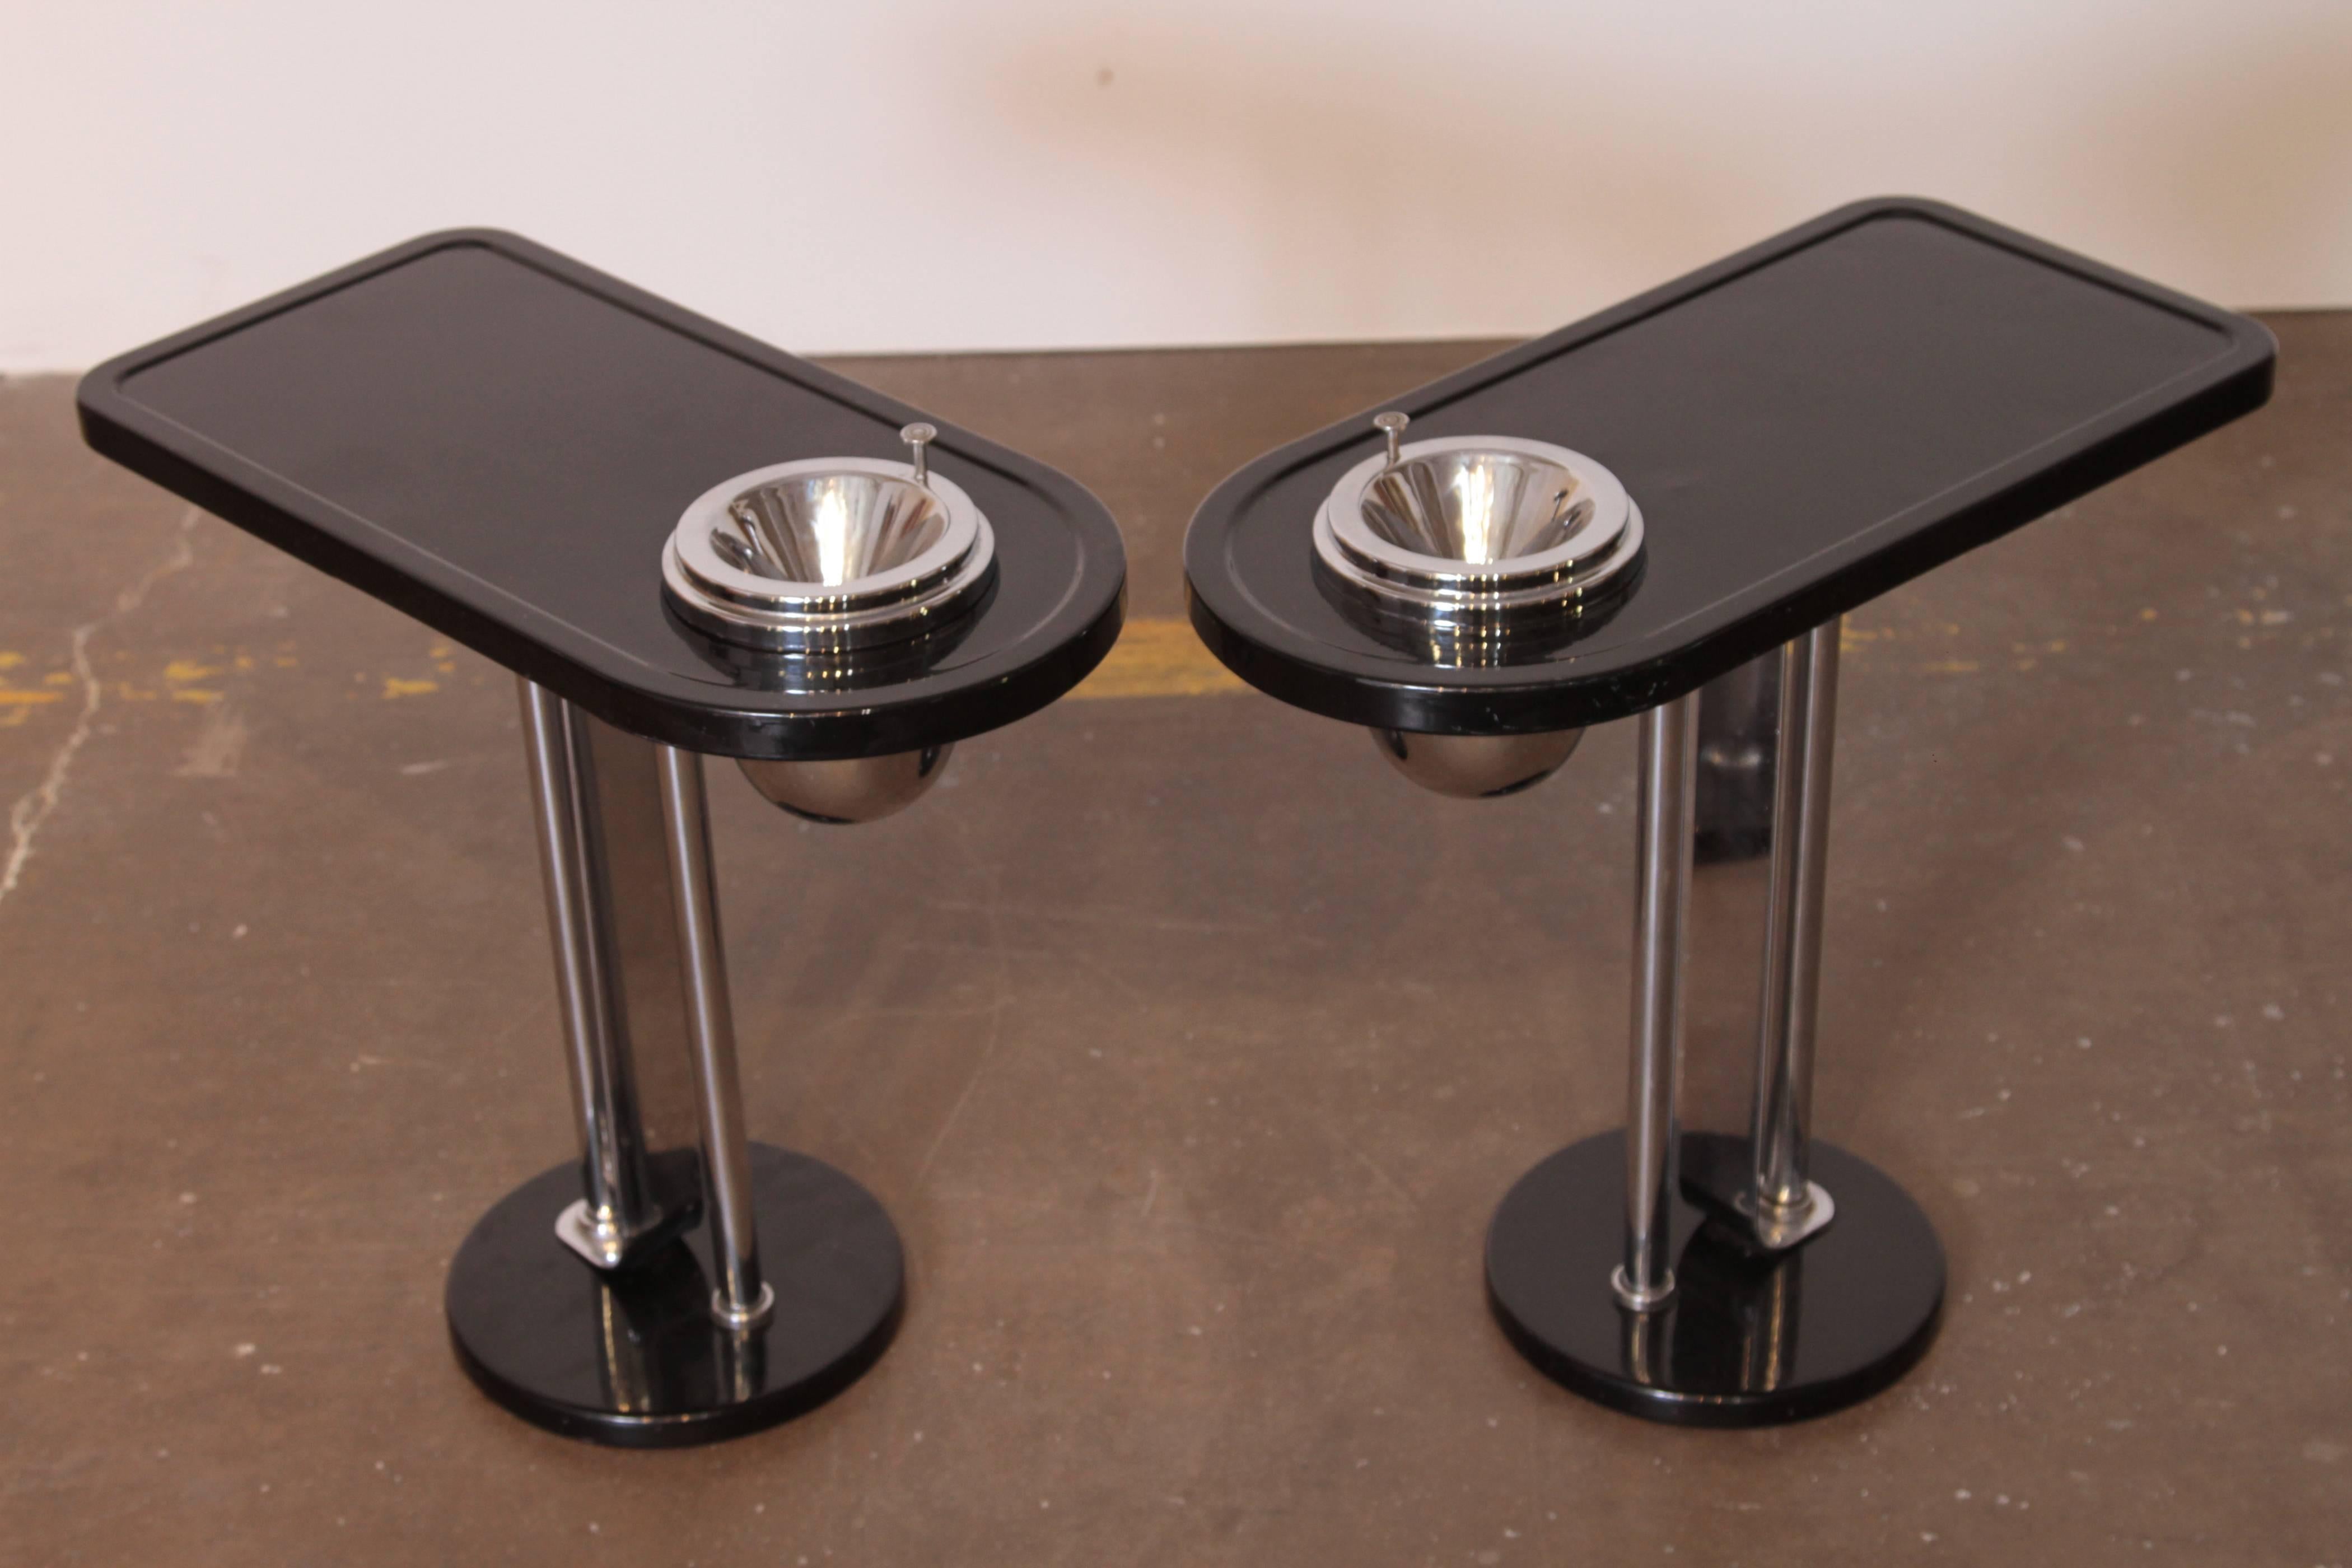 Machine Age Art Deco Wolfgang Hoffmann smoker tables for Howell, signed pair. Hoffman. Smokestand. Smoking stand.

Very difficult to source original Hoffmann table design. Extremely rare matched pair.

Vintage Walter Von Nessen - esque